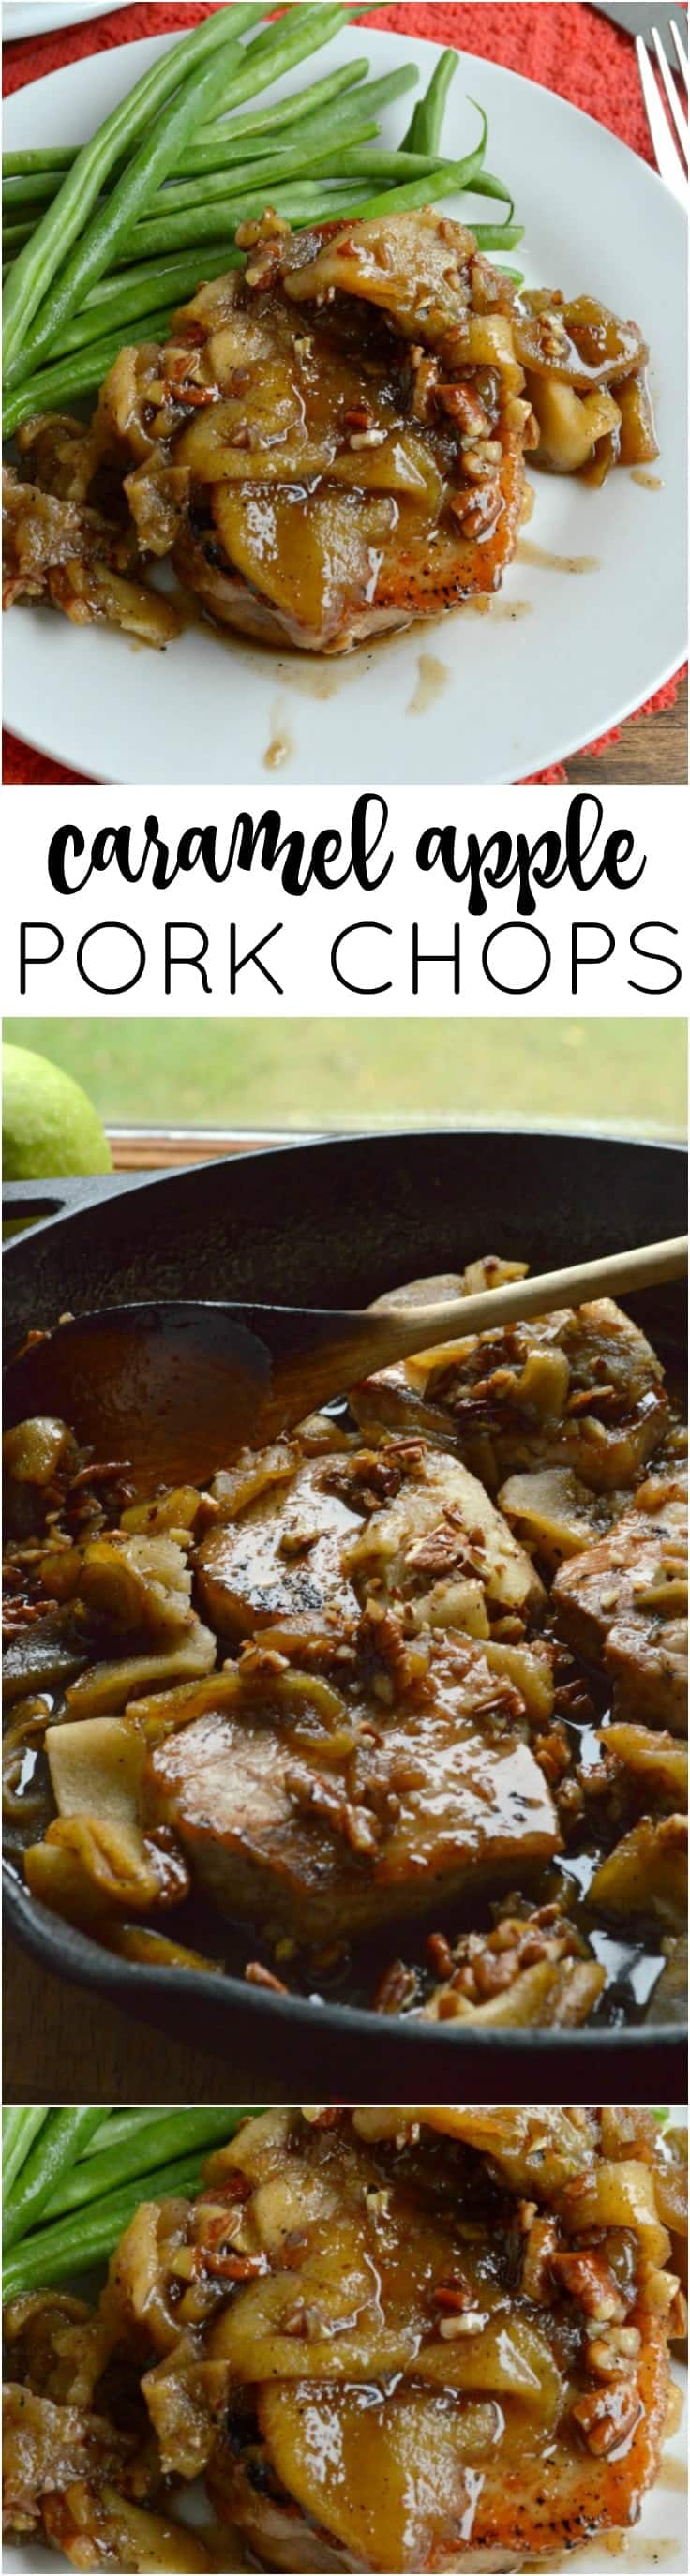 An easy 30 minute meal loaded with fall flavors! These Caramel Apple Pork Chops are a weeknight meal favorite.